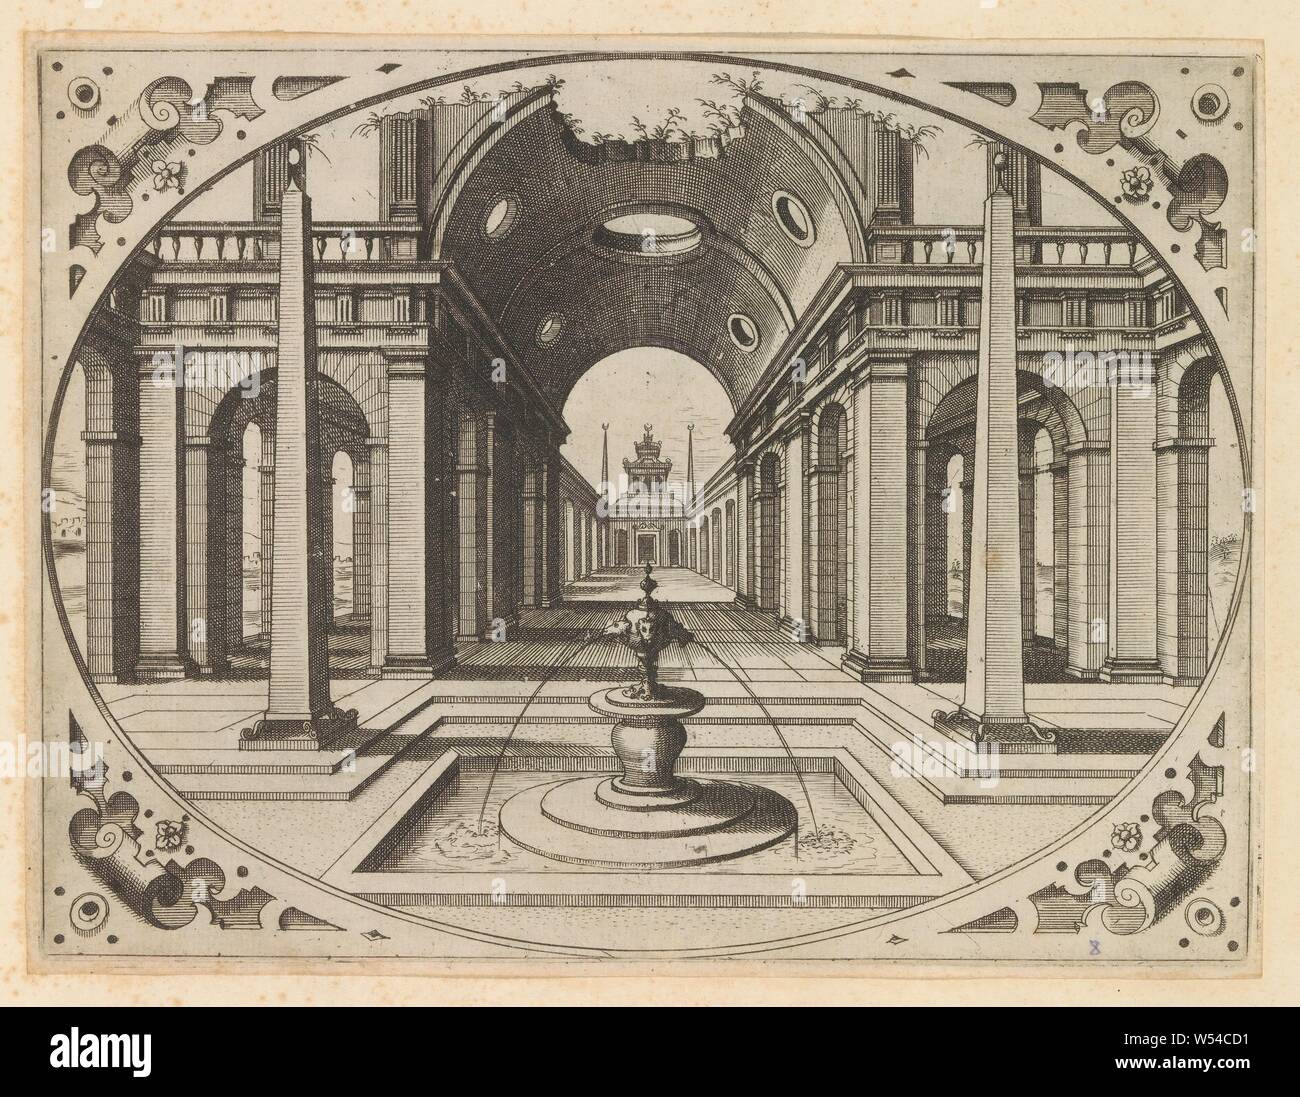 Portal with barrel vault and face in an arcades street Variae Architecturae Formae (...) (series title) Architectural perspectives in oval frames for intarsia (series title), Portal with barrel vault and face in a street with arcades. In the foreground a fountain in a square basin, flanked by two obelisks. In the corners rolling. The print is part of an album, architectural representations in general, ornamental fountain, Johannes of Lucas van Doetechum, Antwerp, after 1601, paper, etching, h 167 mm × w 220 mm Stock Photo